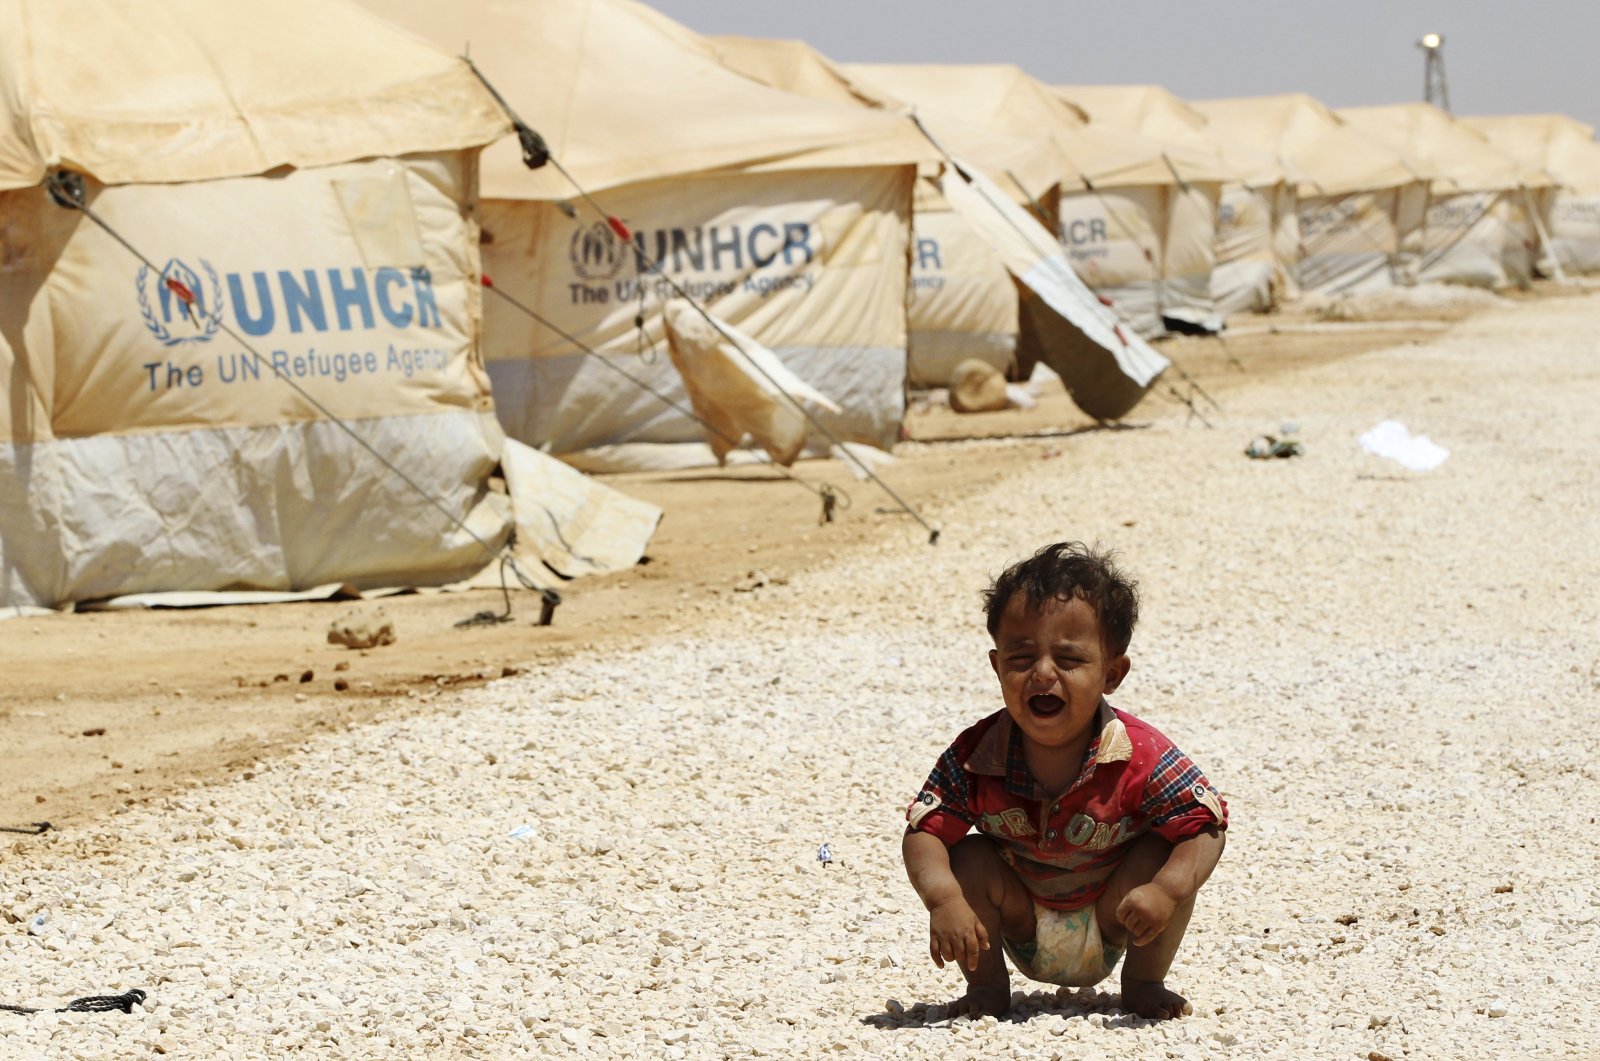 A Syrian refugee child cries at the Al Zaatri refugee camp in the Jordanian city of Mafraq, near the border with Syria, Aug. 3, 2012. (Reuters File Photo)